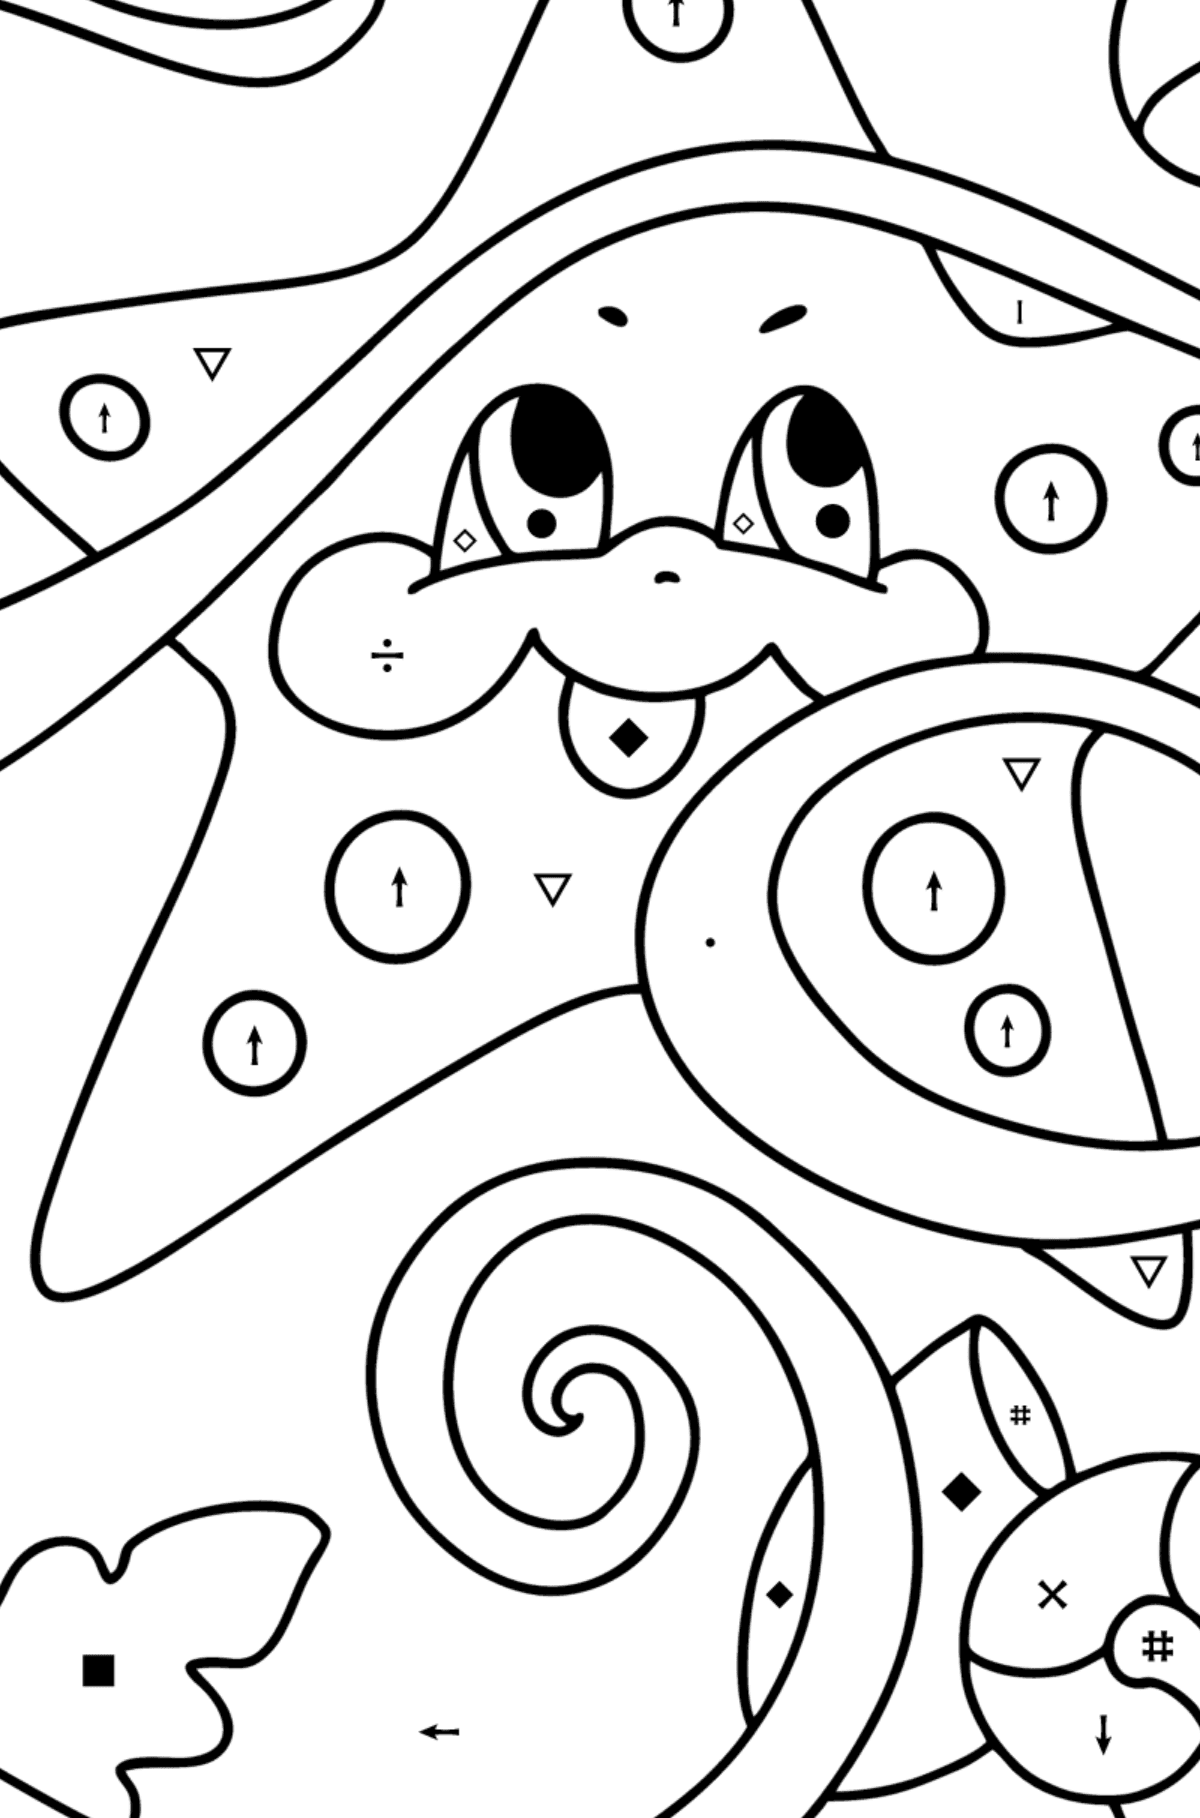 Baby starfish coloring page - Coloring by Symbols for Kids